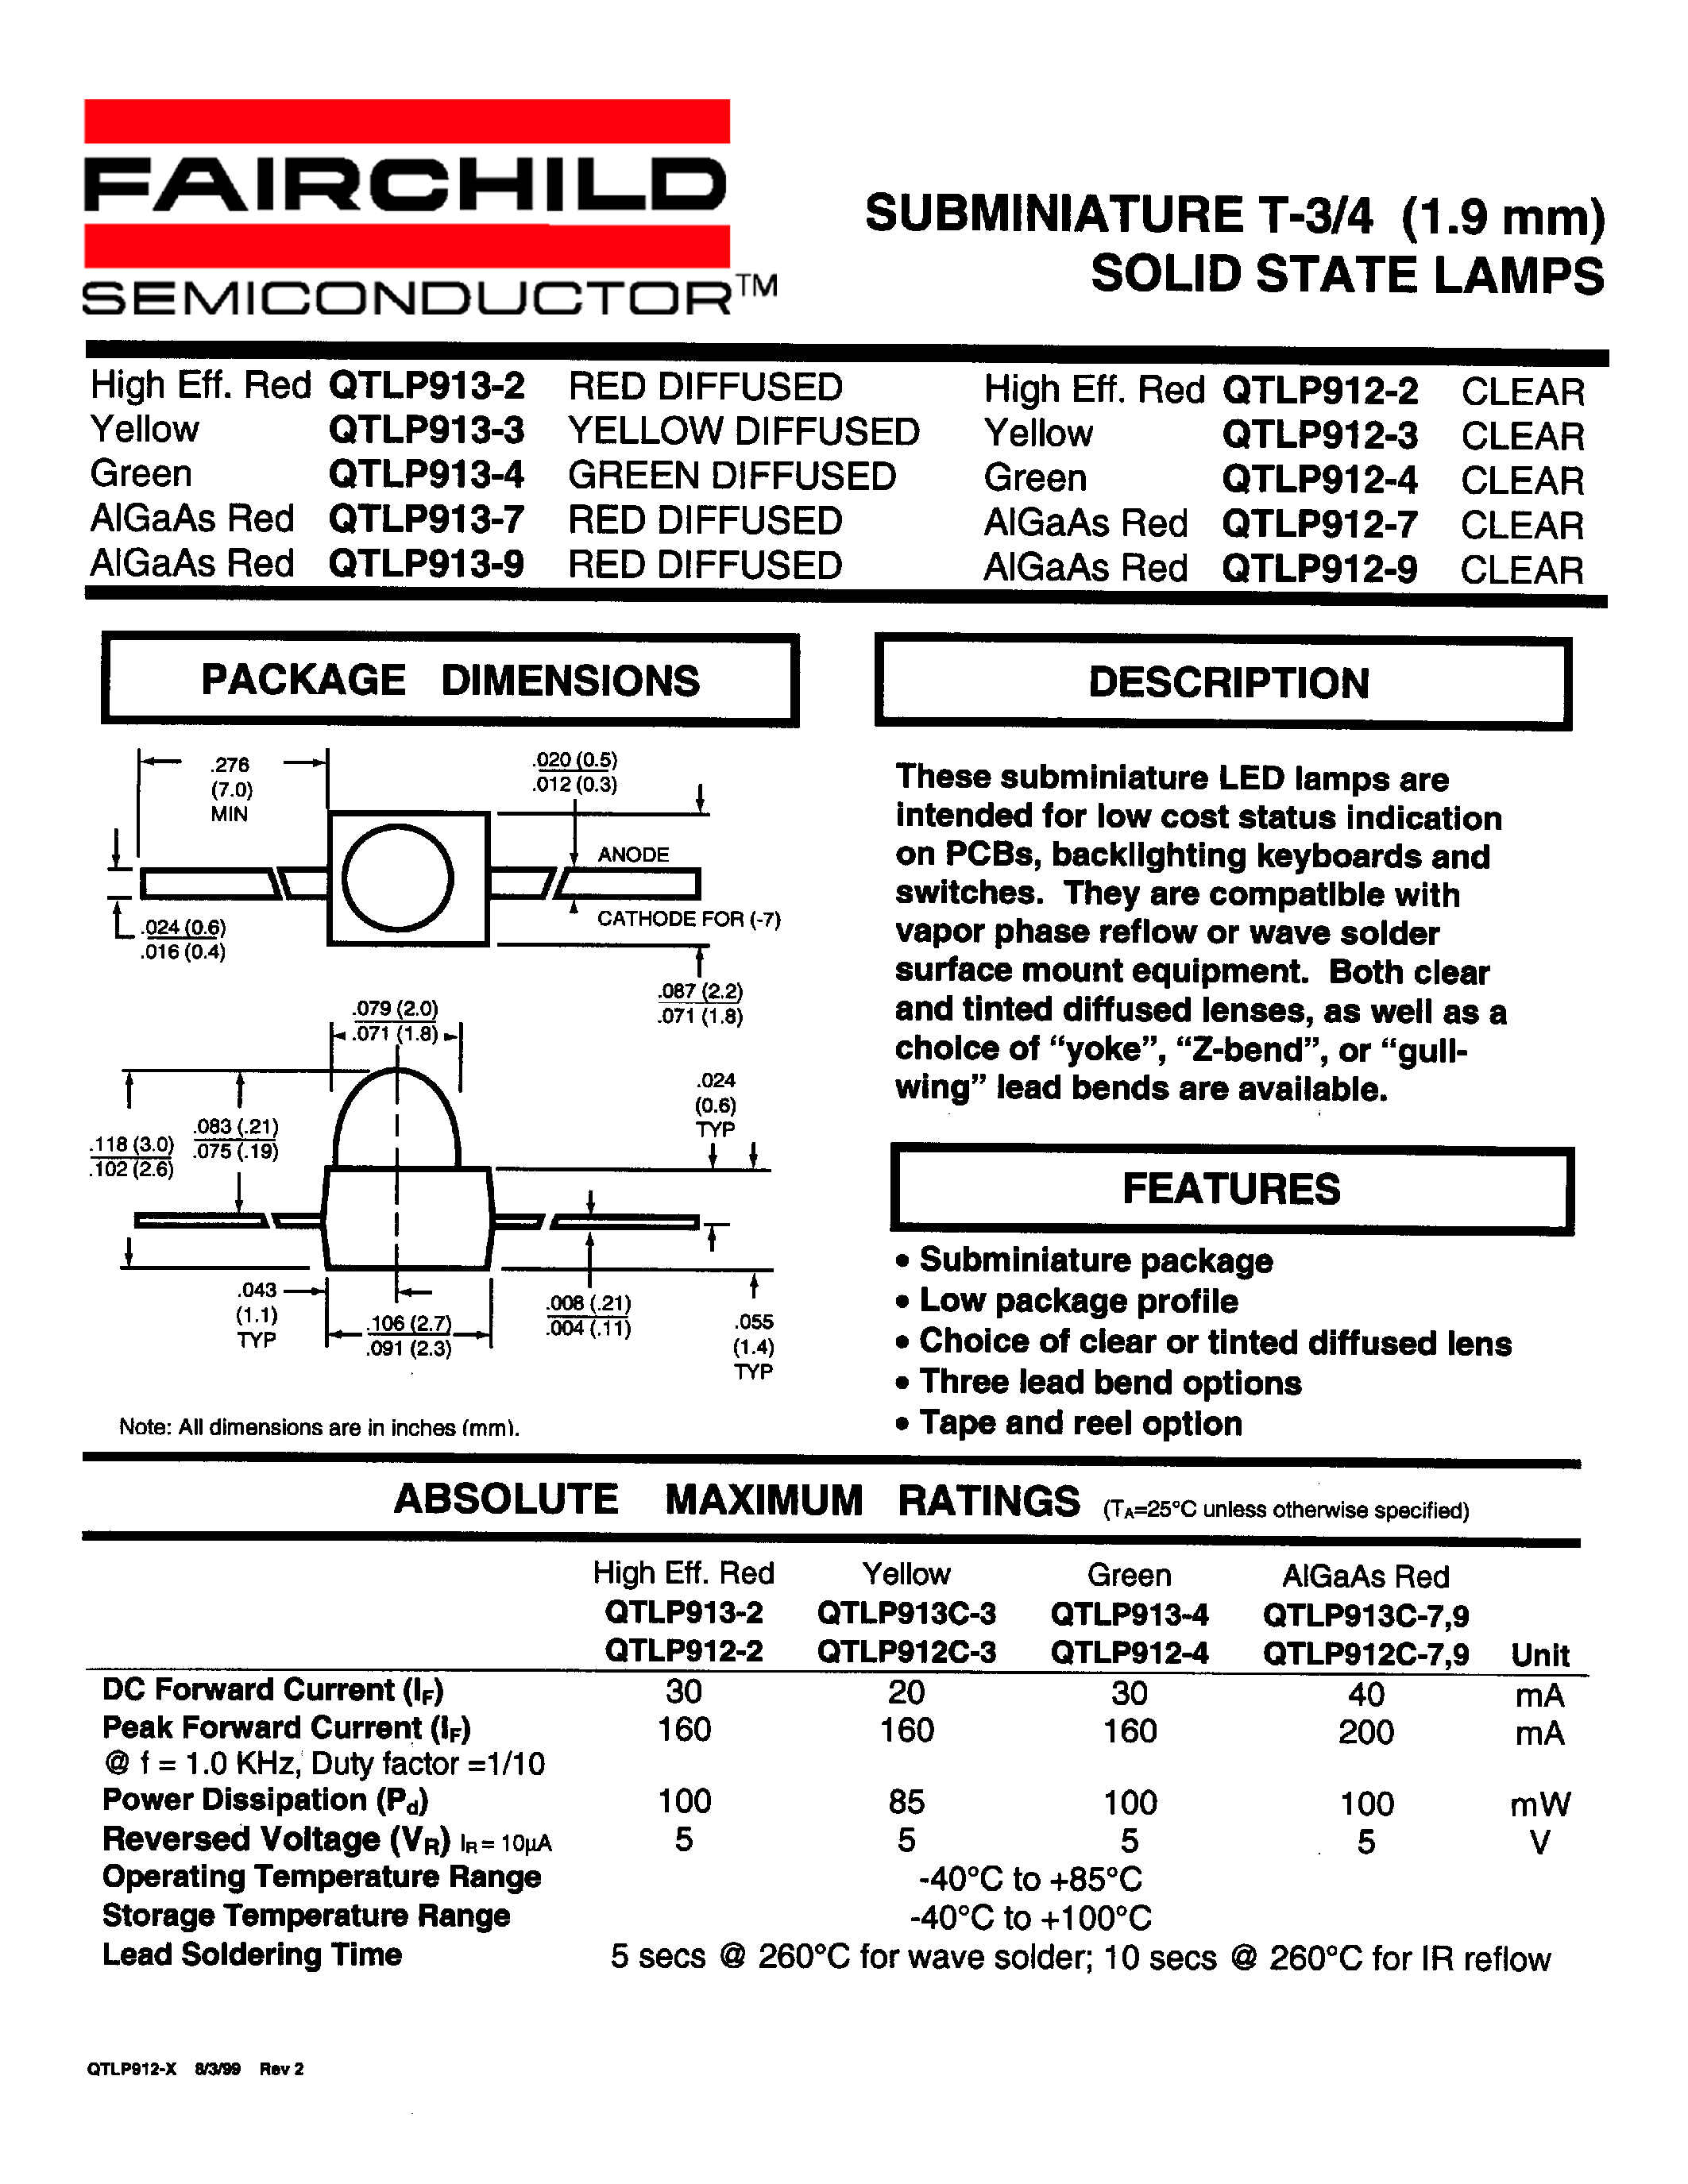 Datasheet QTLP912-9 - SUBMINIATURE T-3/4 (1.9 mm) SOLID STATE LAMPS page 1